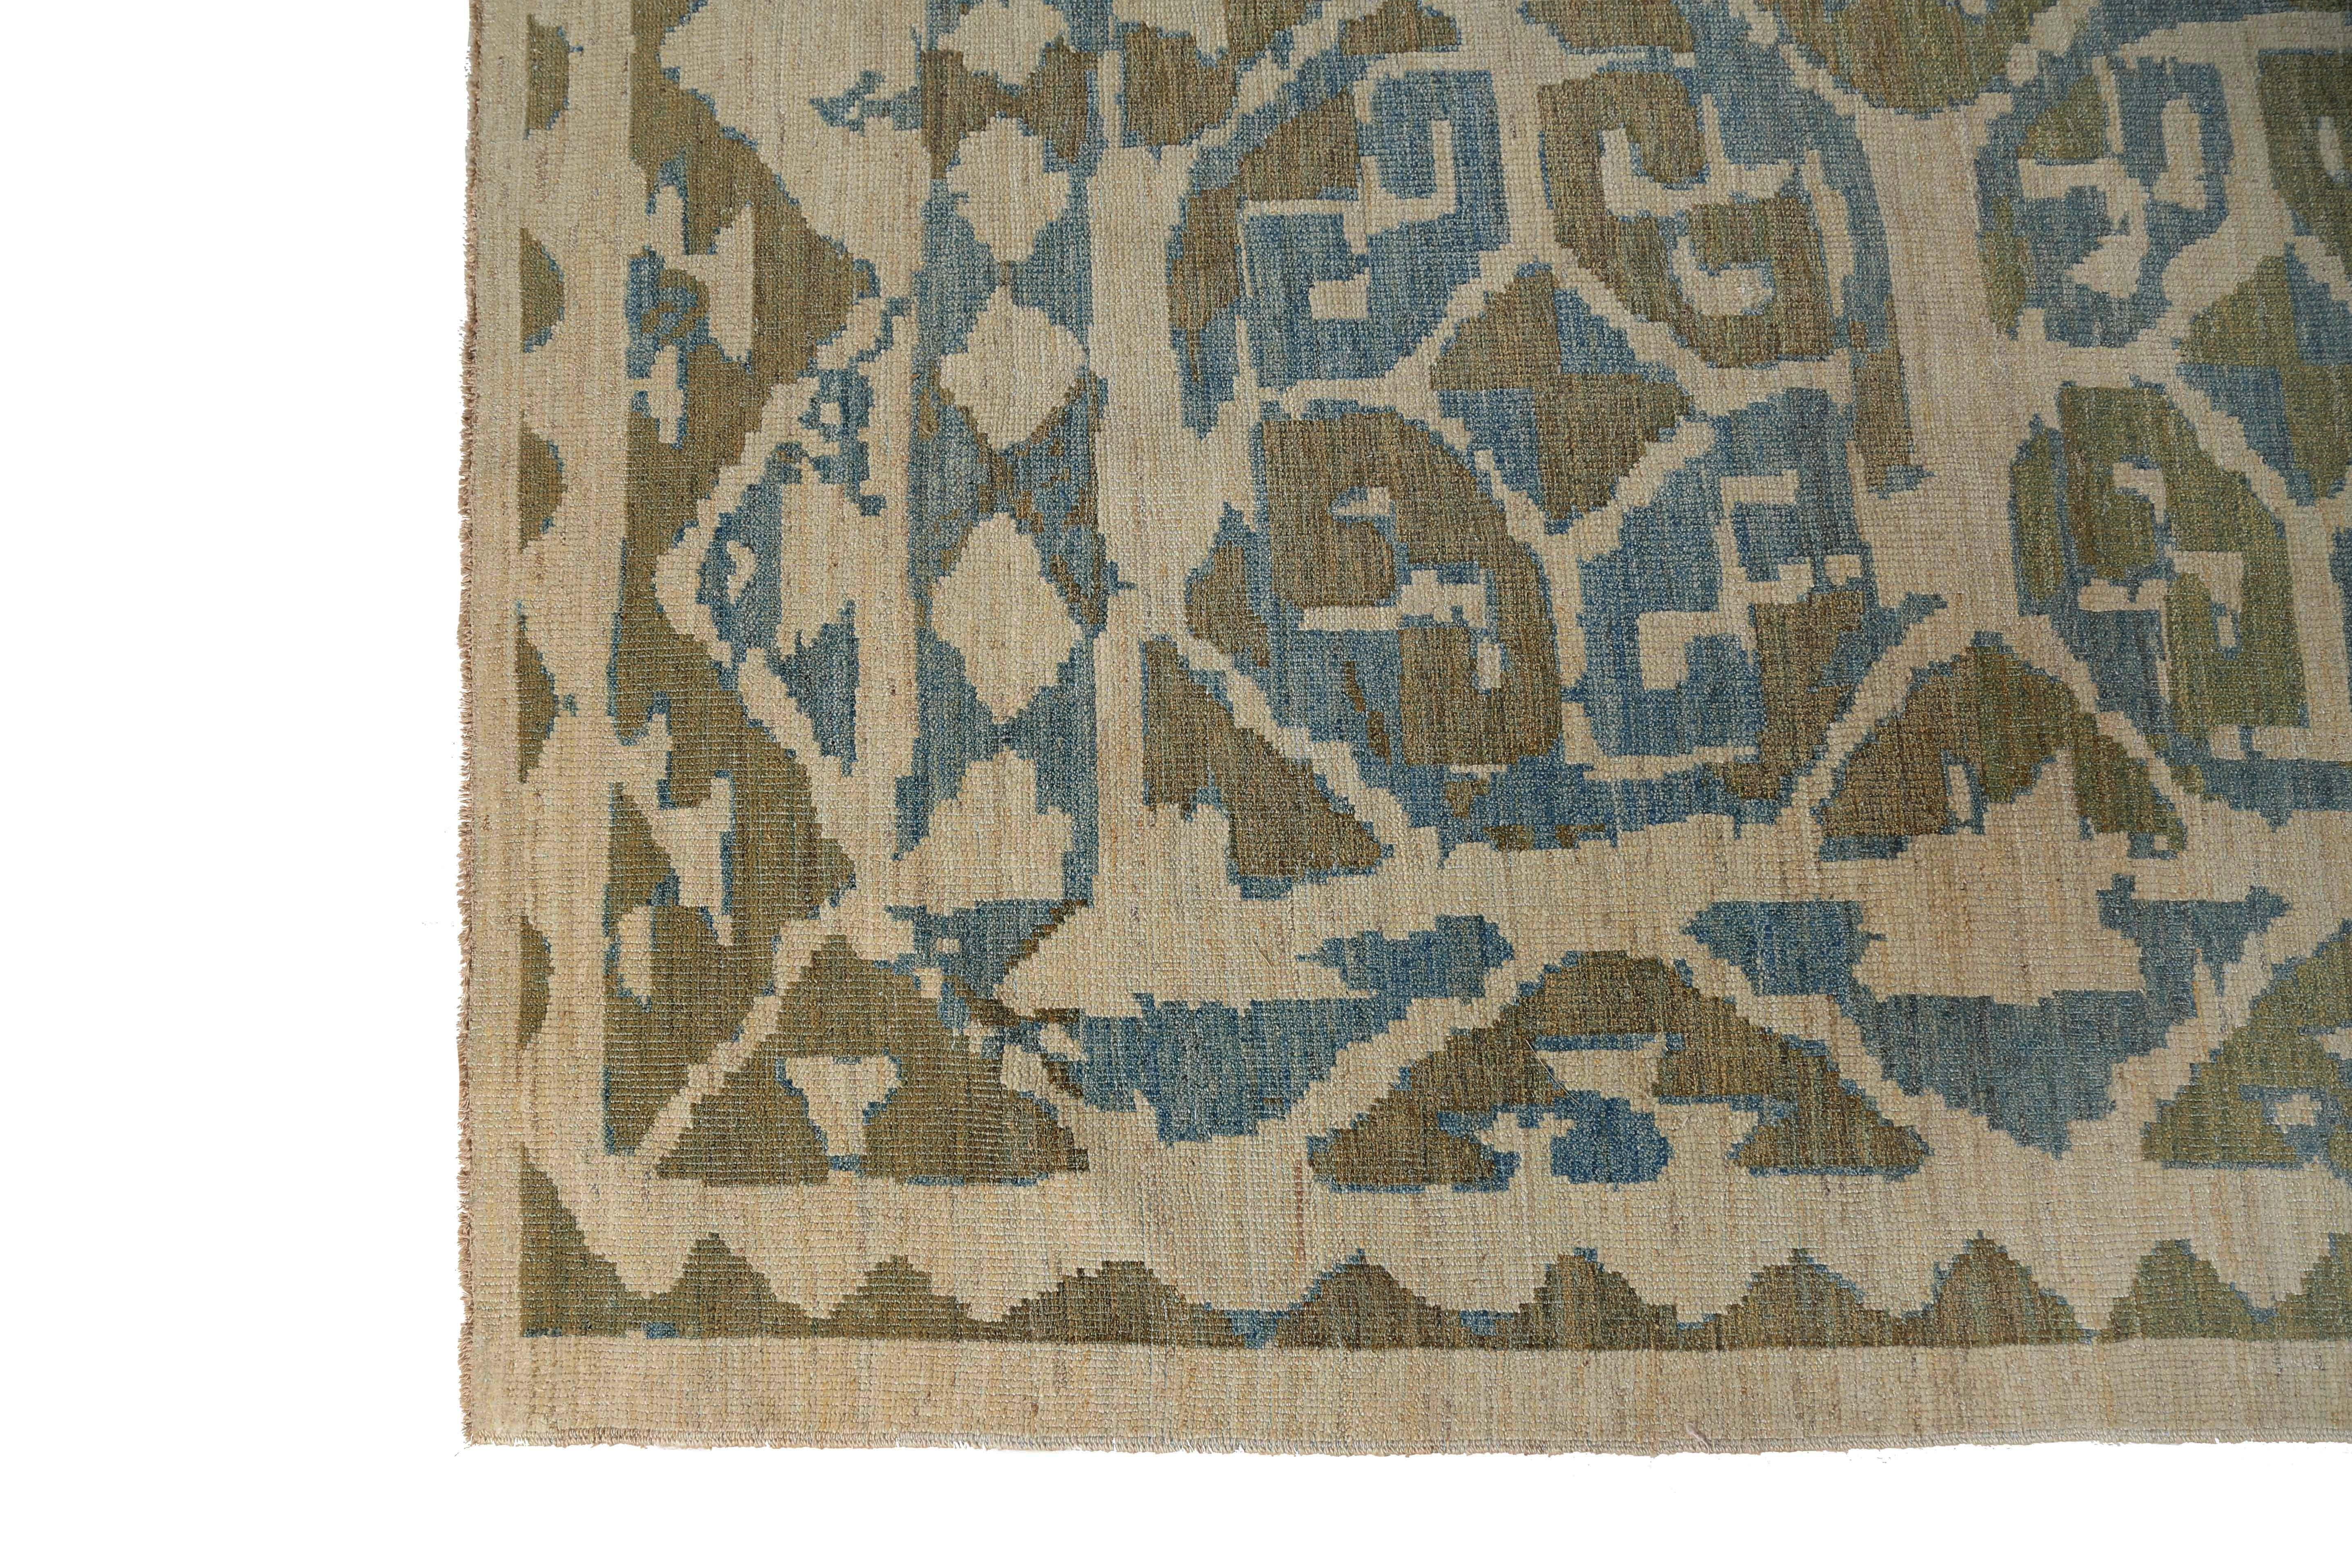 Introducing our exquisite handmade Sultanabad rug, measuring 9'8